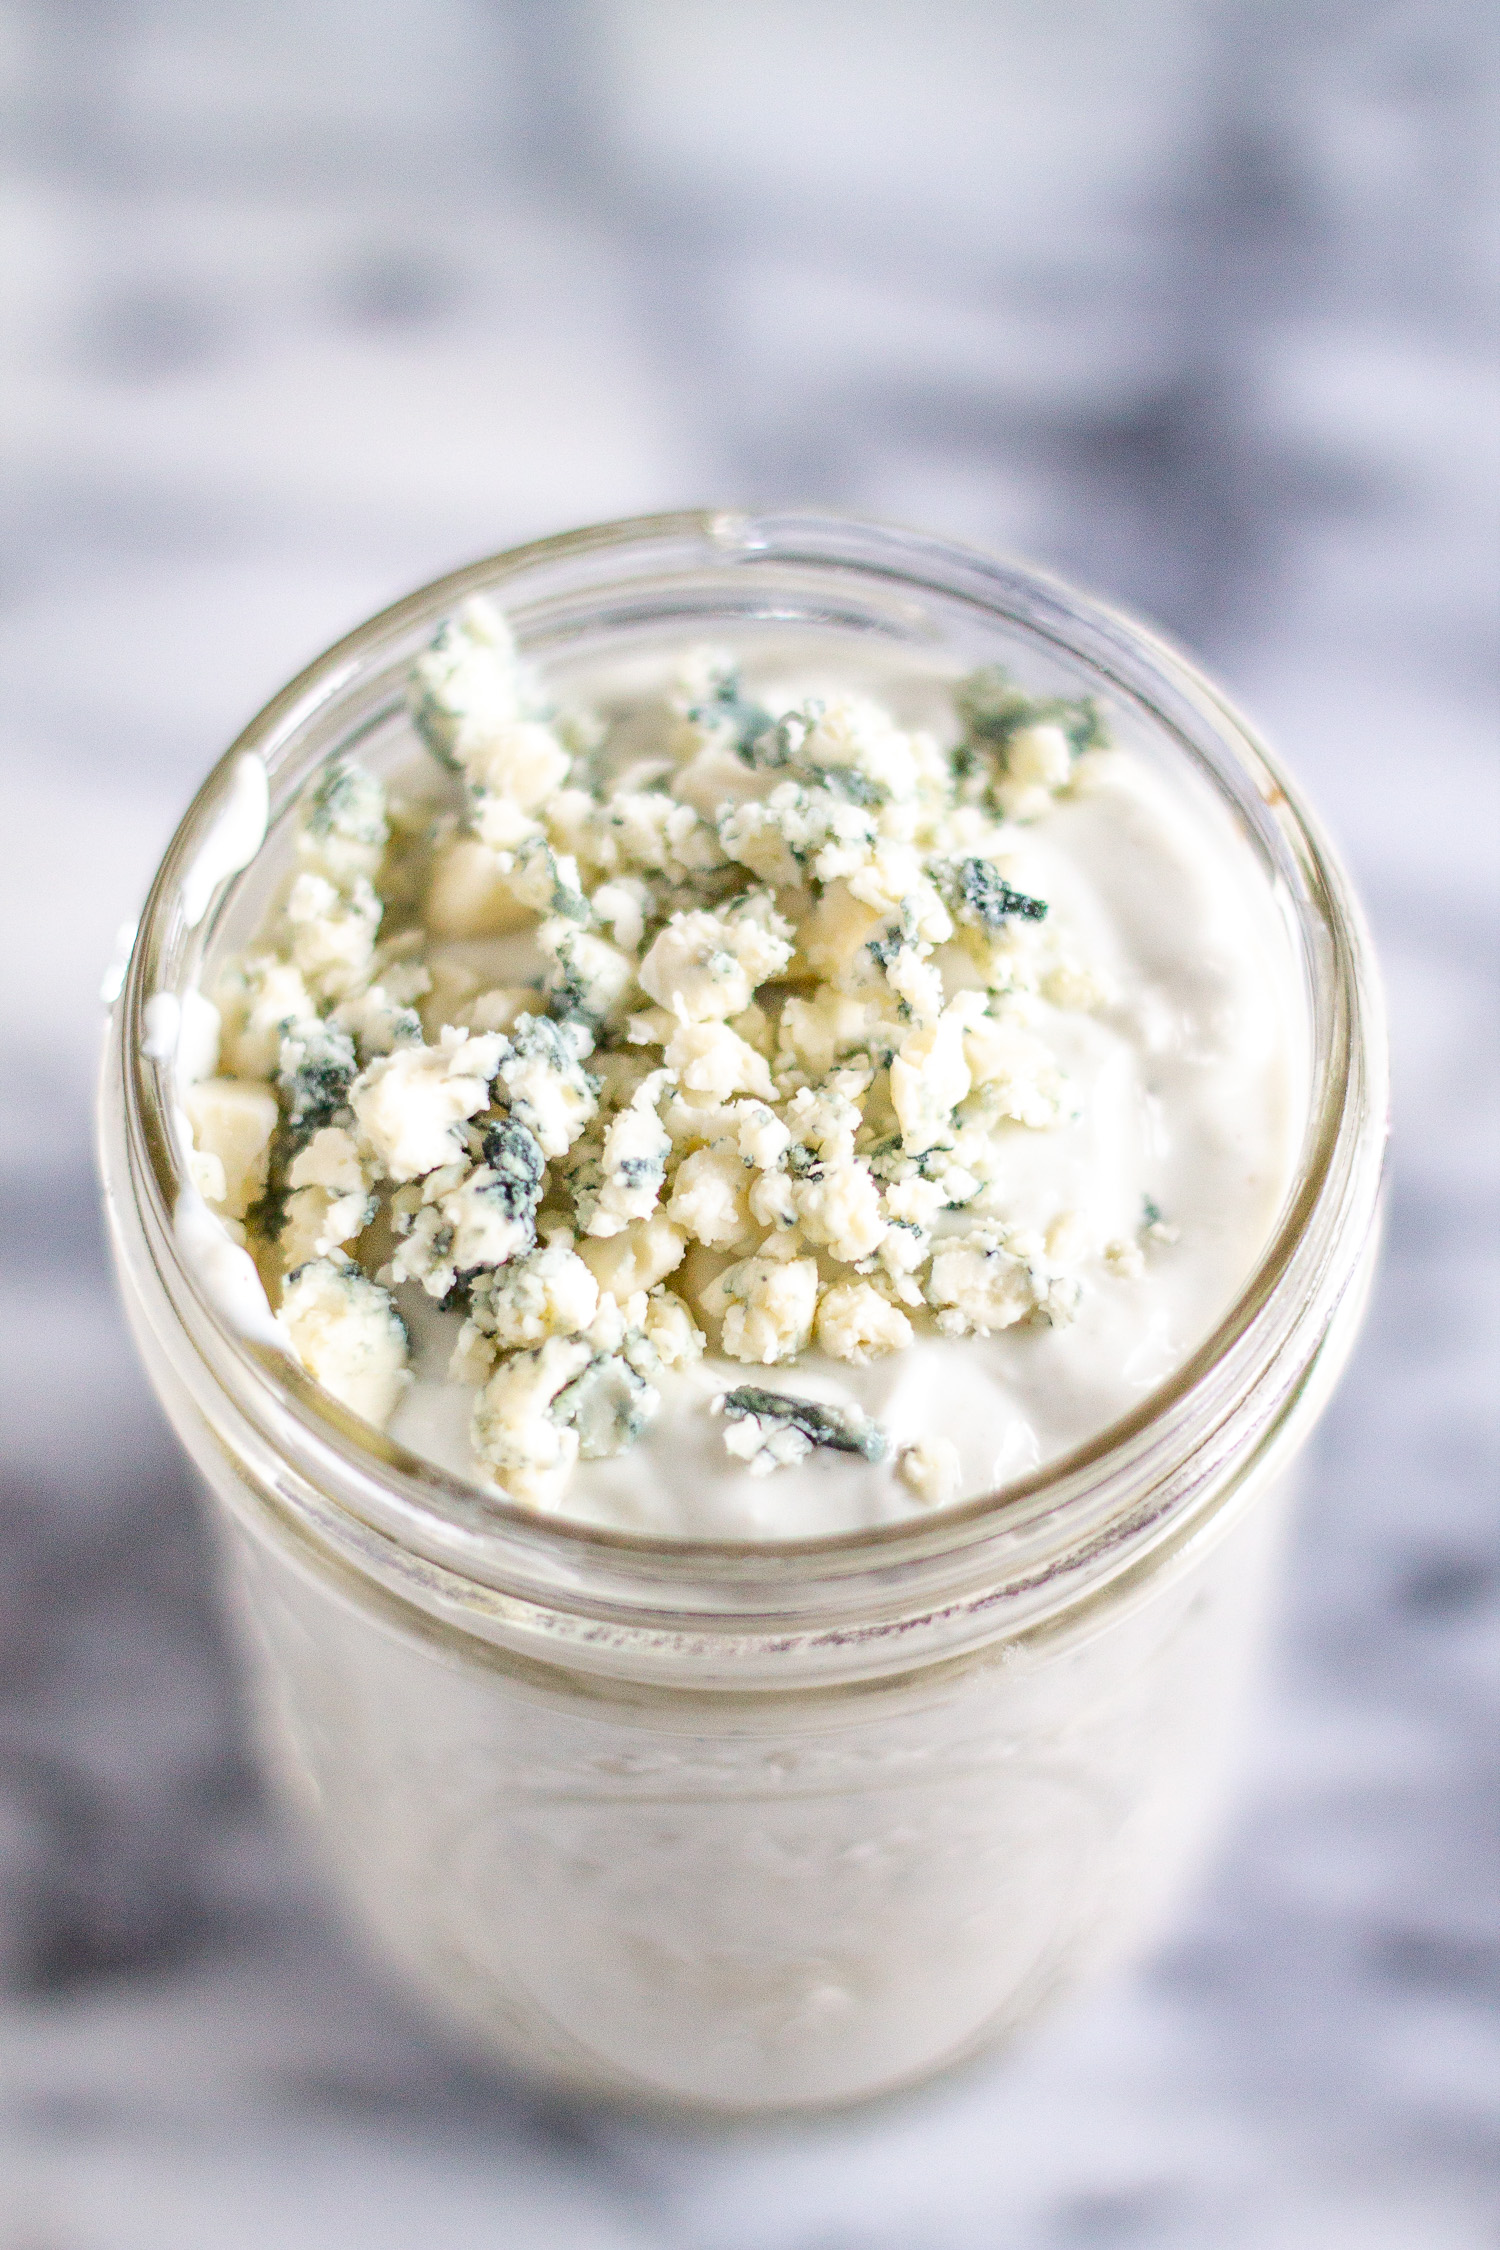 Blue cheese dressing in a glass.